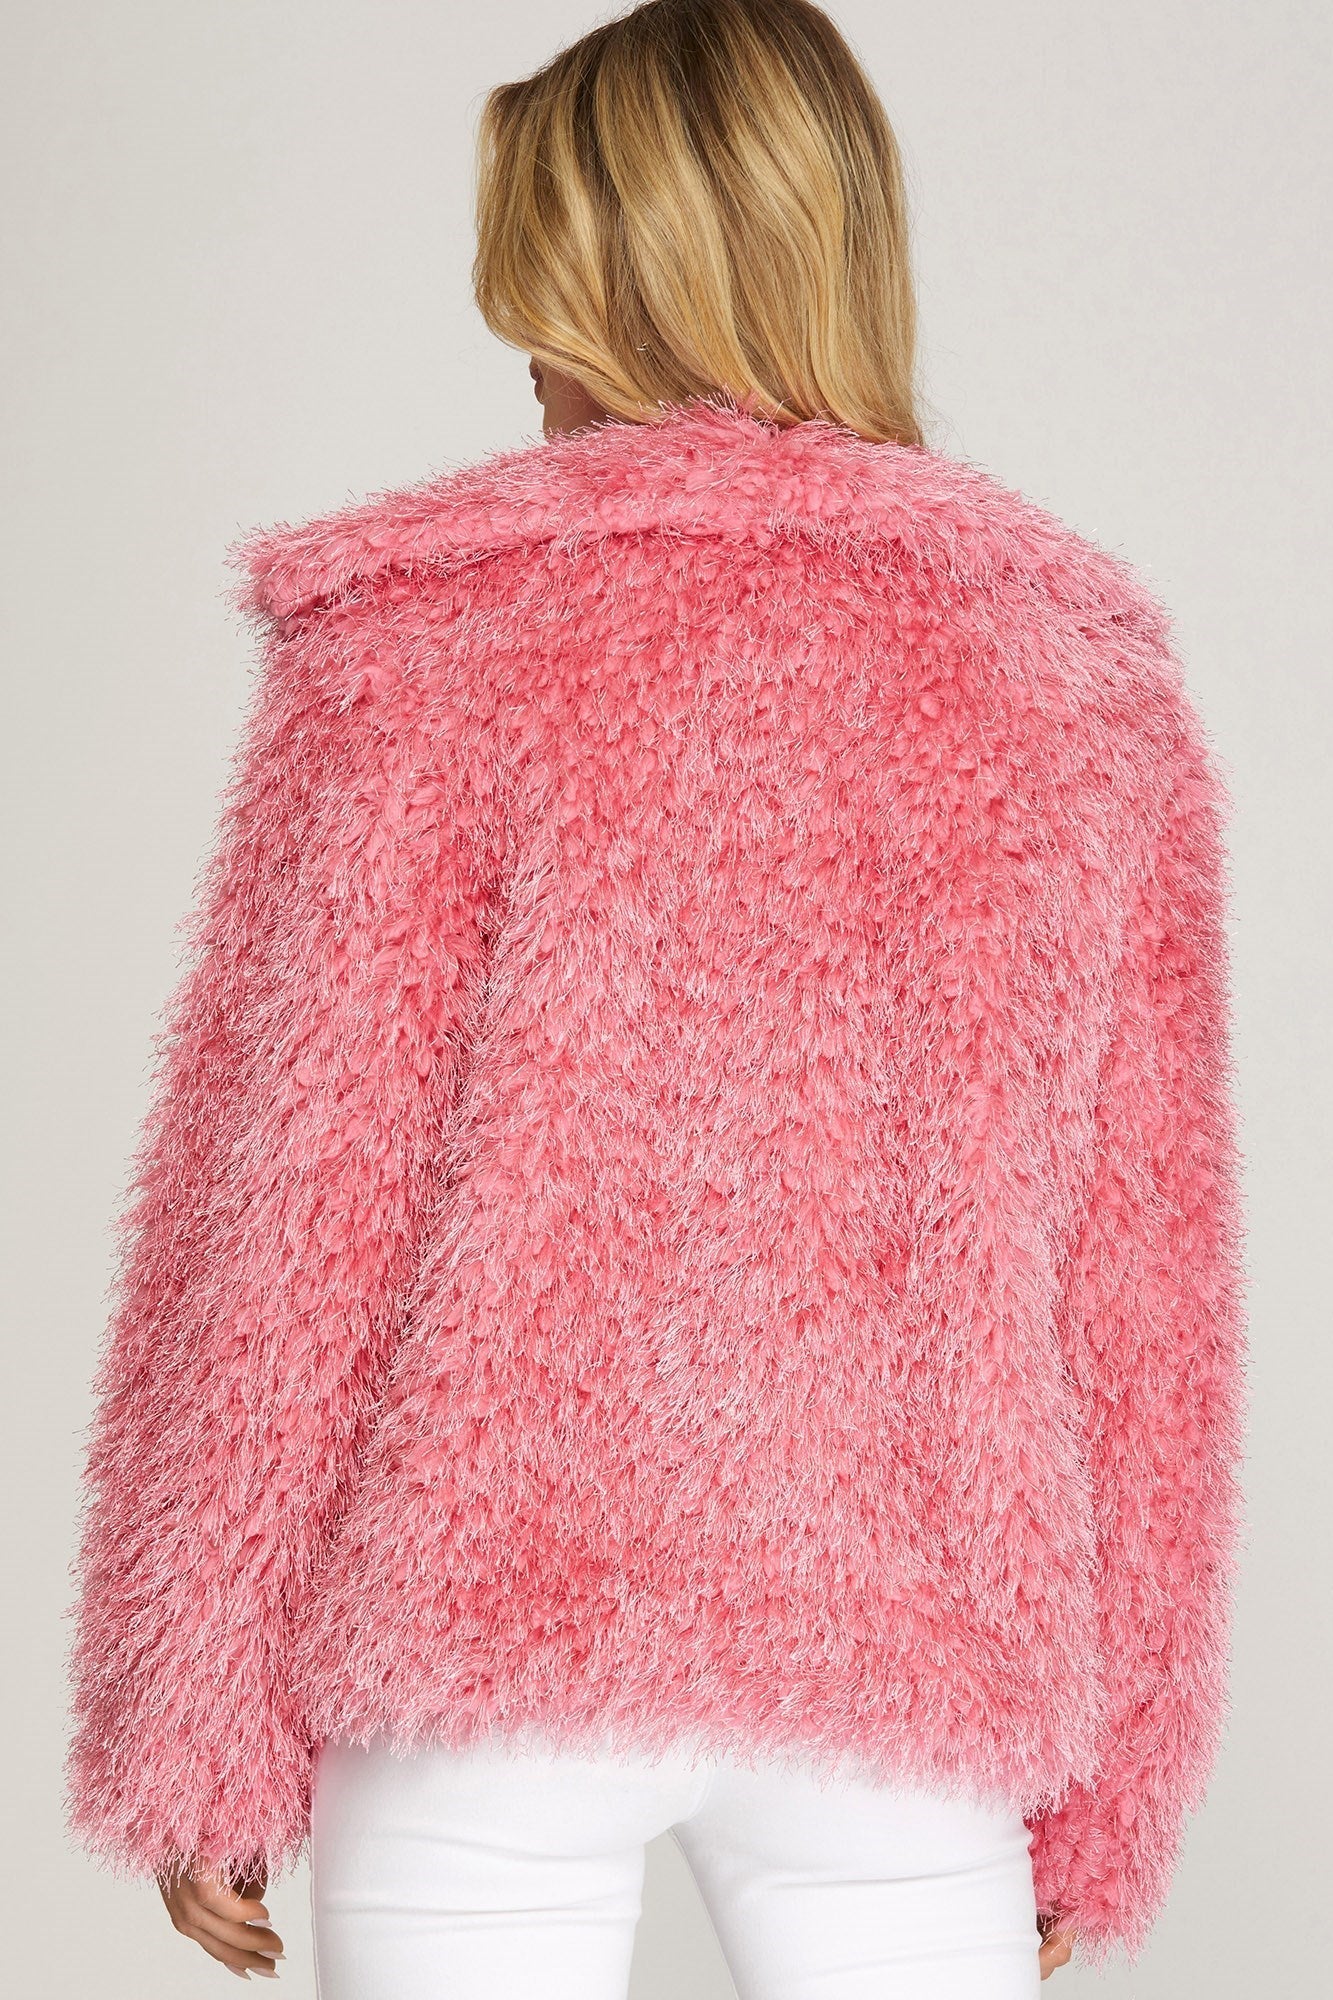 SHE AND SKY Women Jackets HOT PINK / S Faux Fur Jacket With Pockets || David's Clothing SY5128